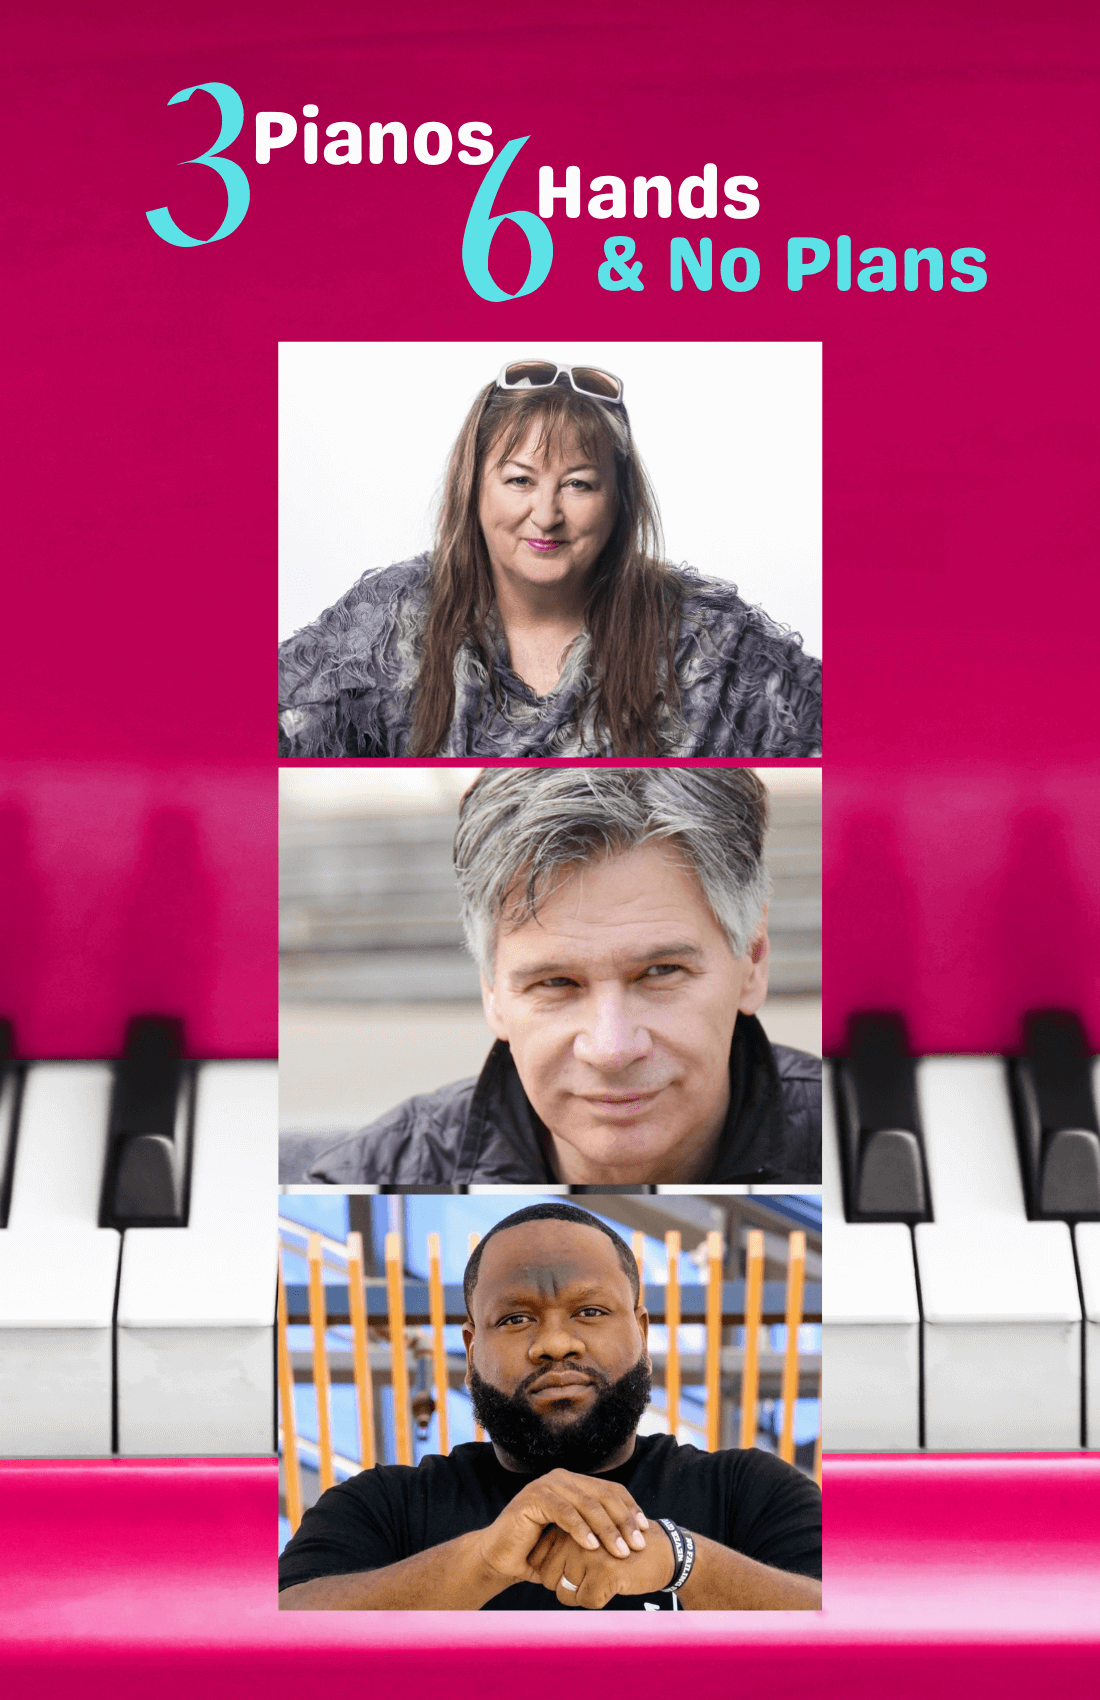 3 Pianos, 6 Hands & No Plans - image of pink piano with three headshot of artists. One Caucasian woman, one Caucasian man and one African Nova Scotian man